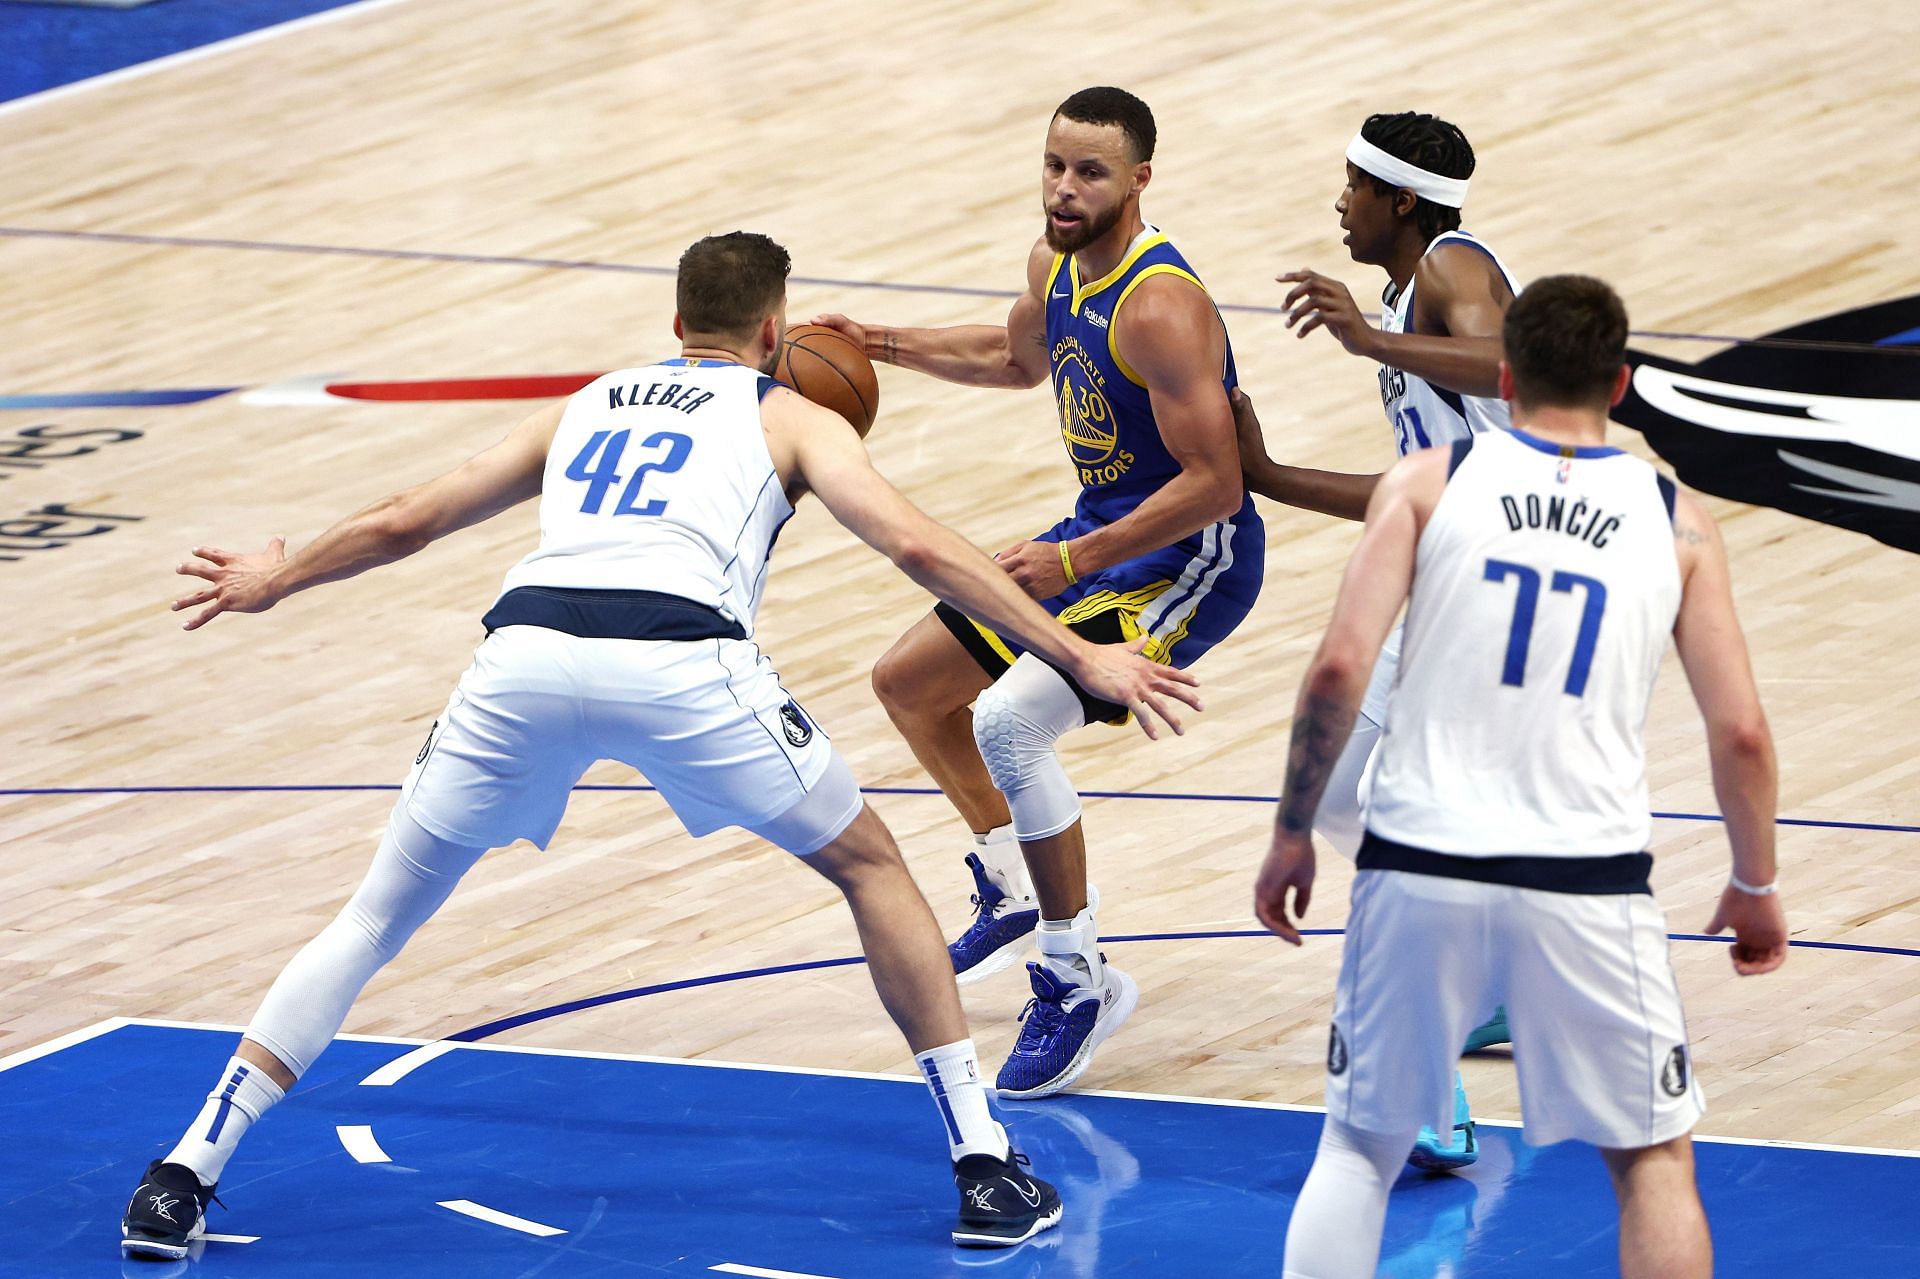 Steph Curry getting defended by three Dallas Mavericks players in Game 4.